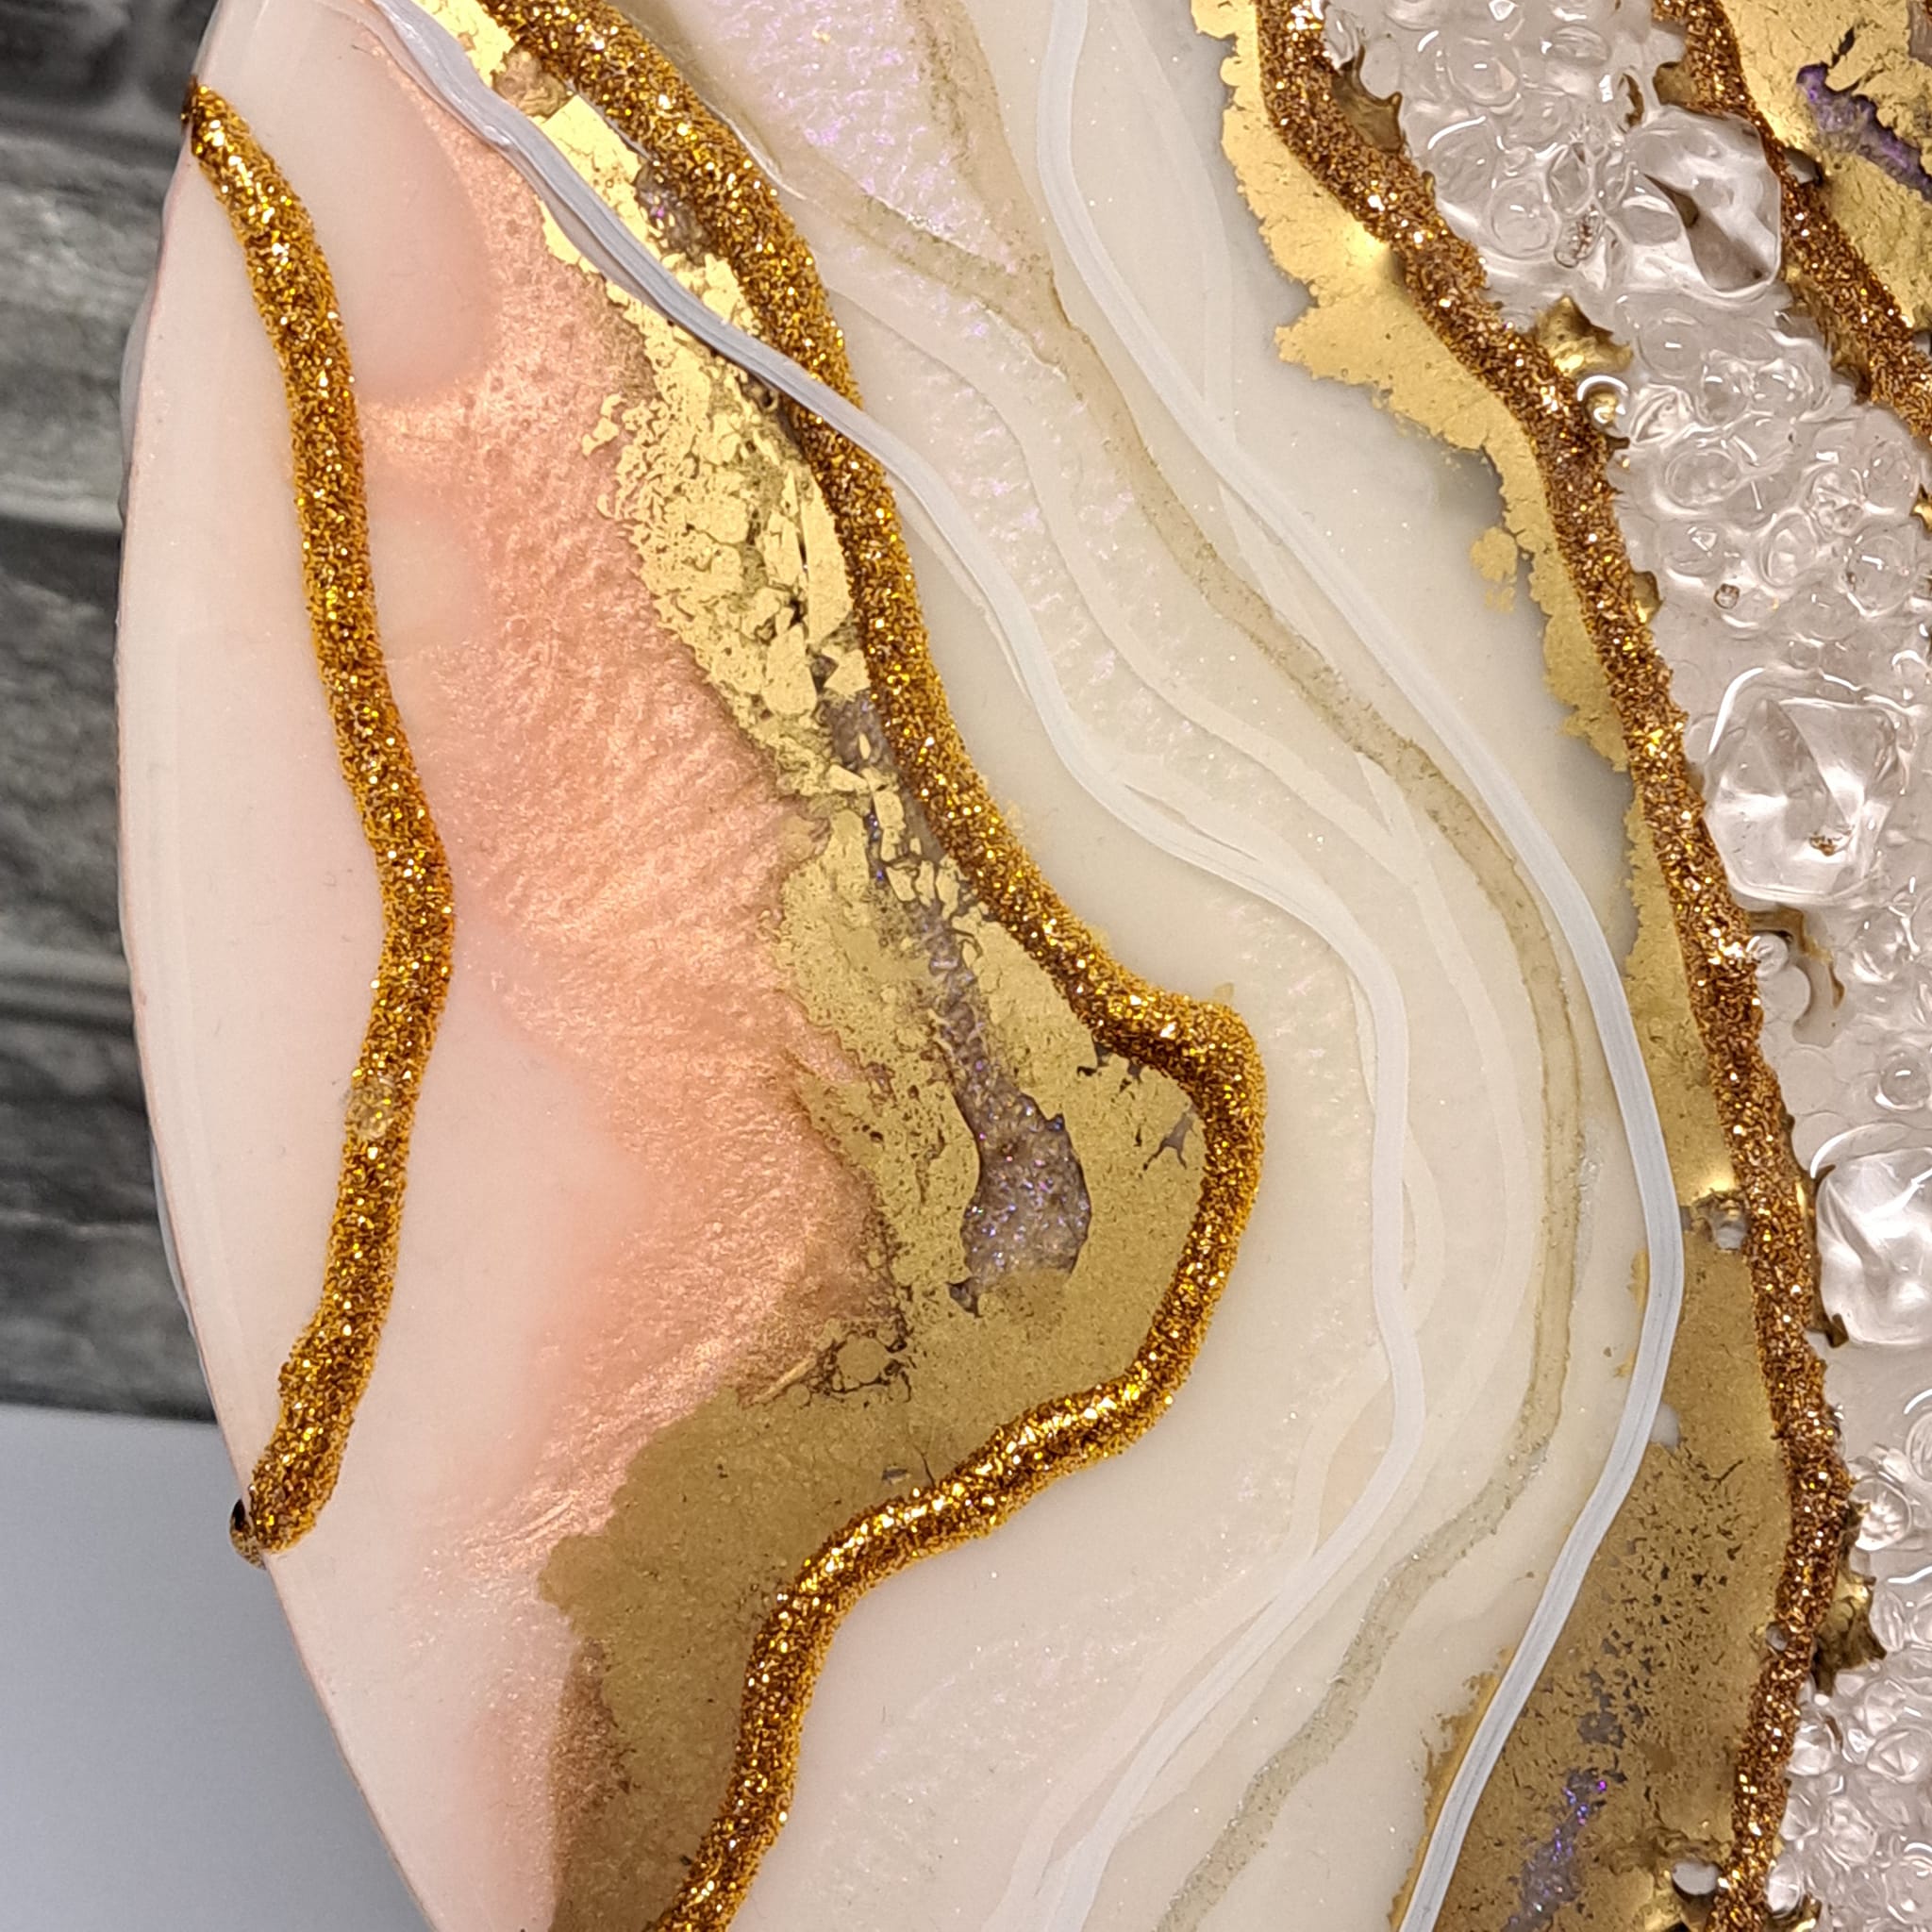 Large hint of peaches and cream, white gold ashes geode art - only one - see video.